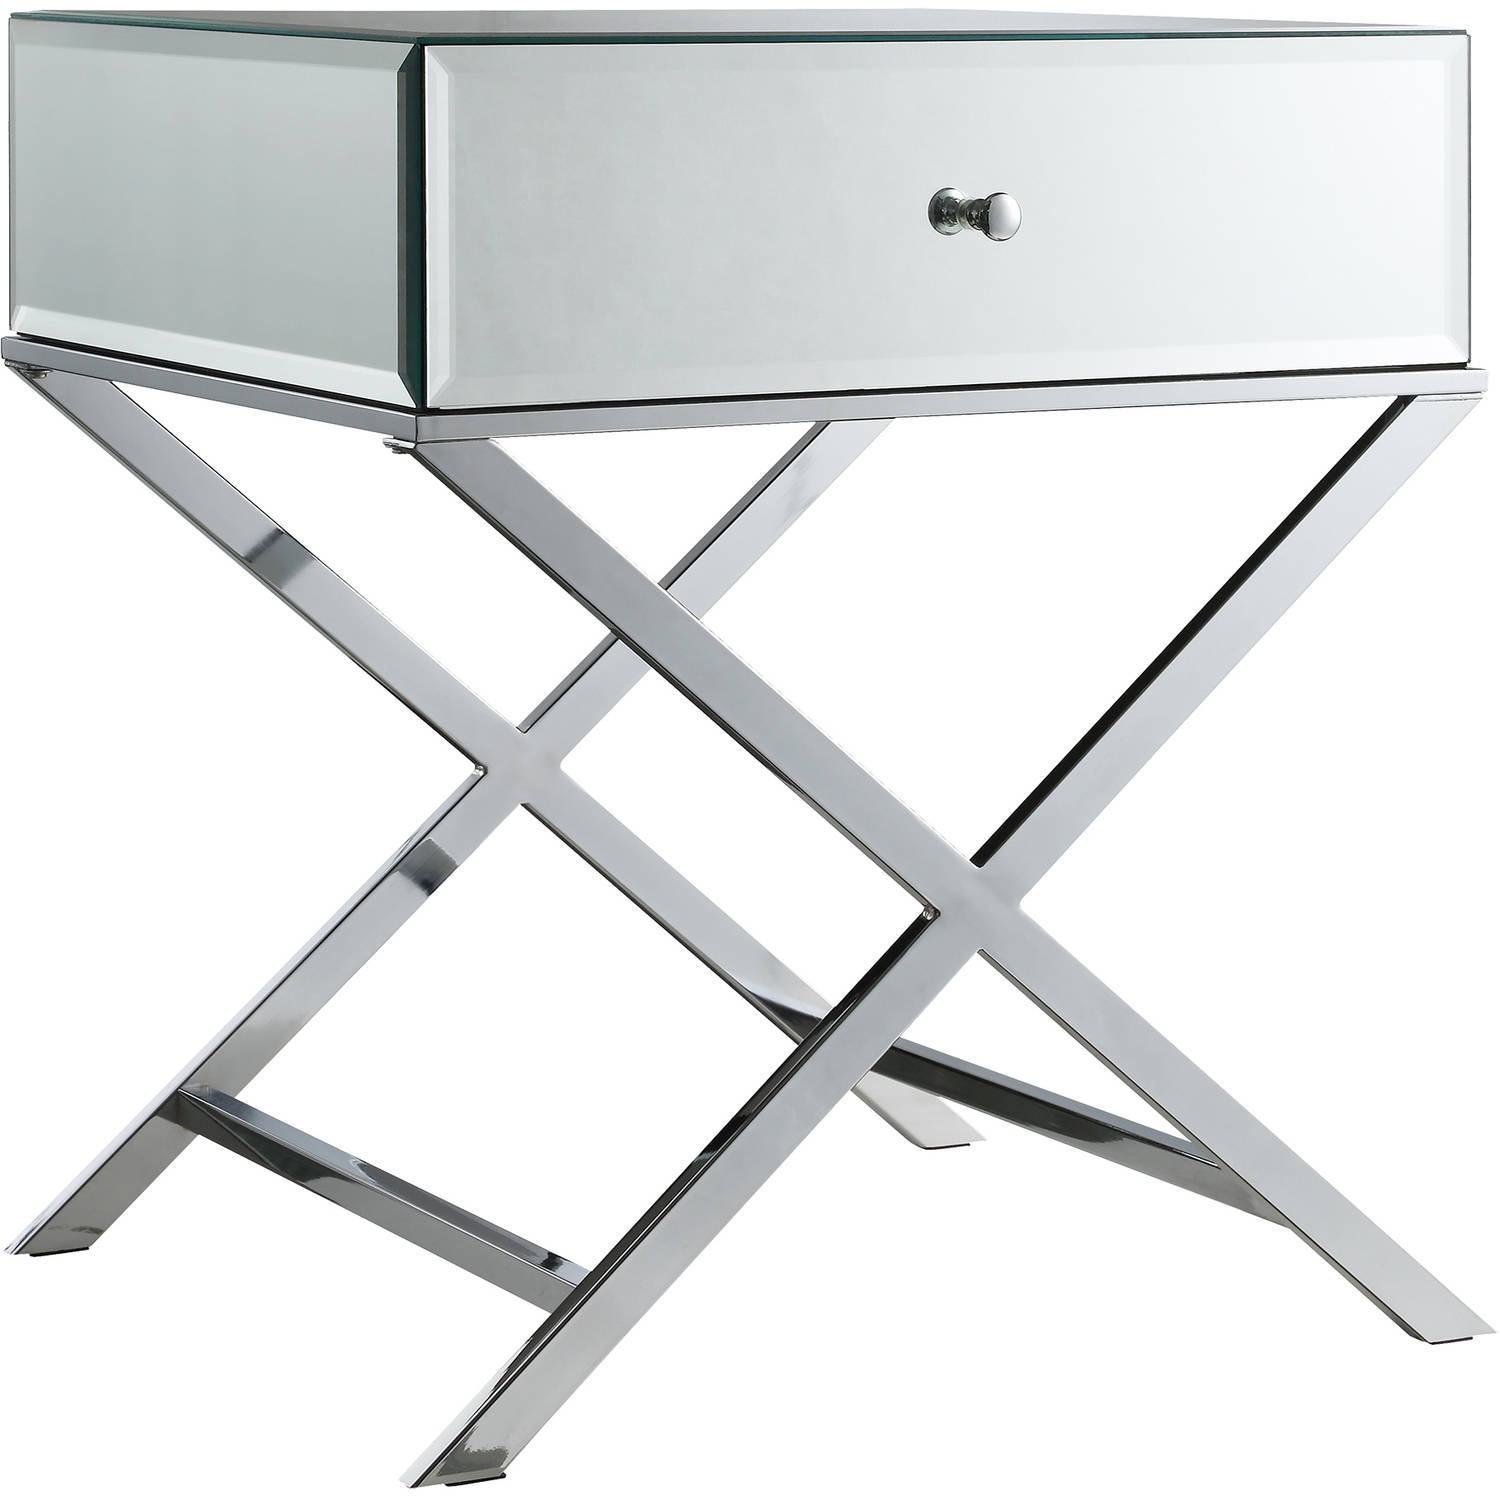 chelsea lane mirror end table with drawer chrome one accent off white tables bedside unit elastic covers portable grill round bronze target kindle fire narrow console inches deep